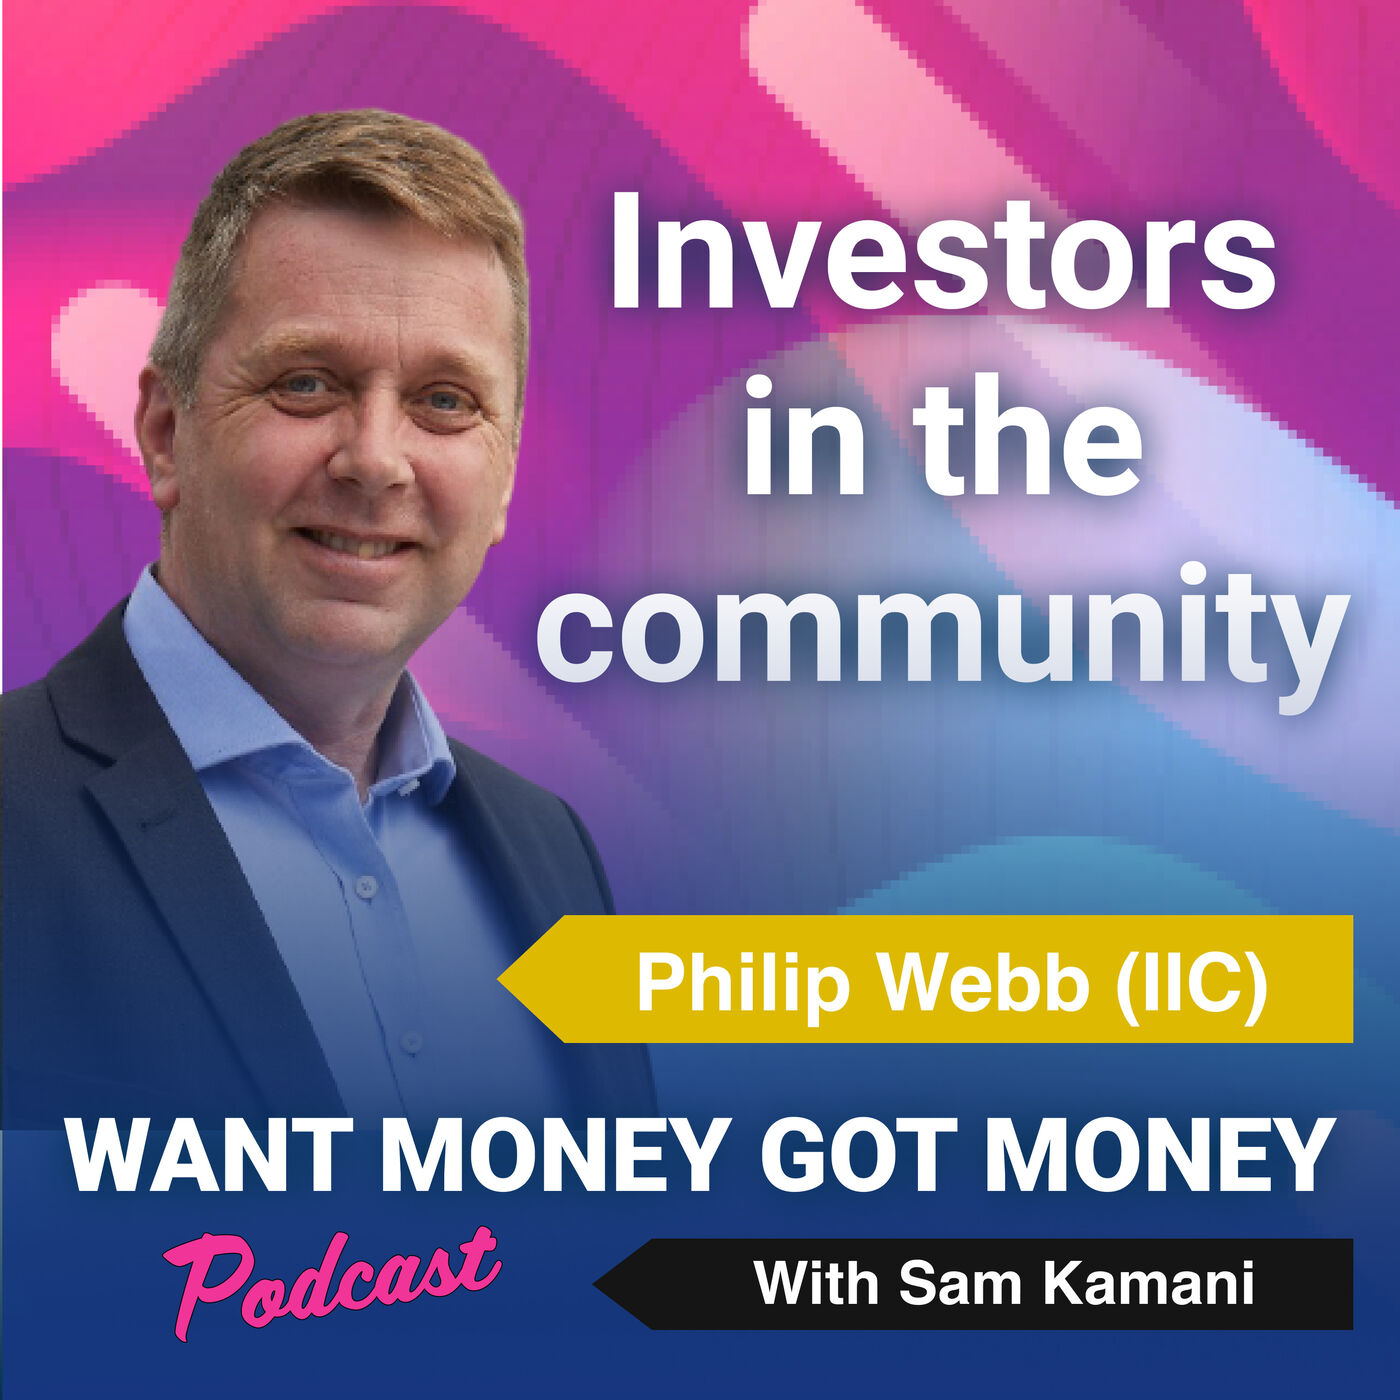 Ep:78 Connecting the investors in community with charities - Philip Webb